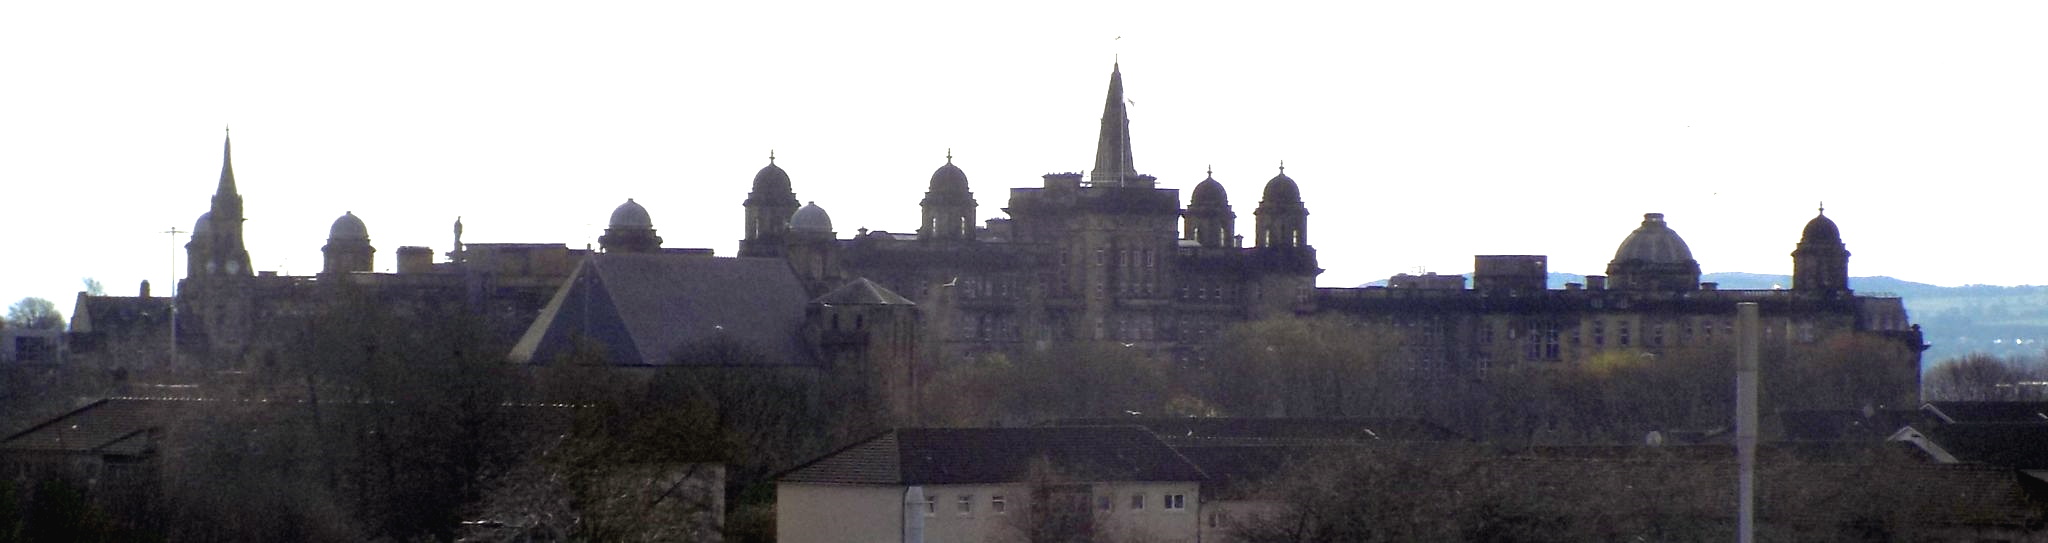 The Royal Infirmary from Sighthill Bridge